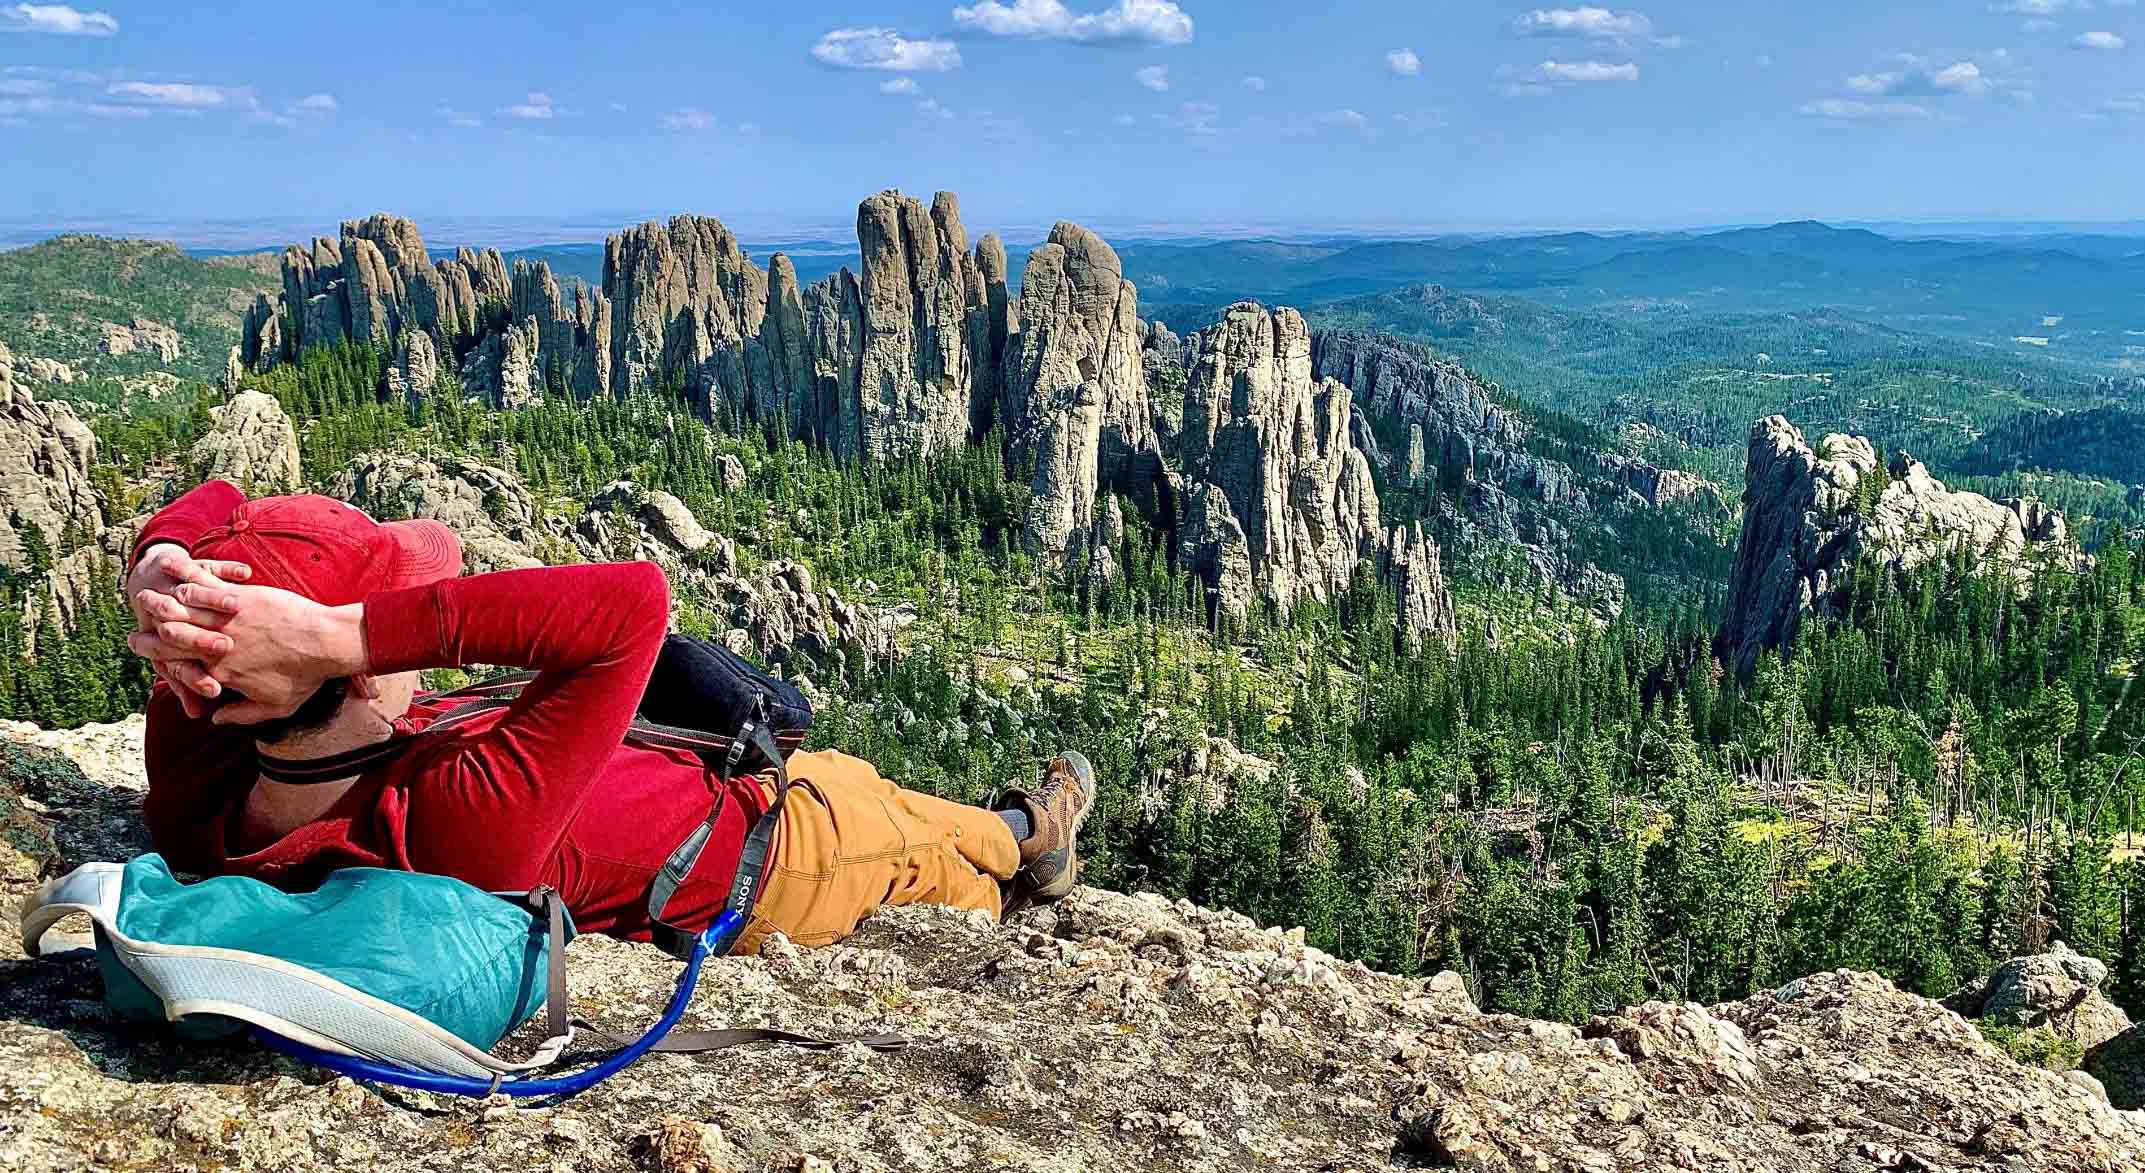 When not drafting legal briefs or in a courtroom, Tyler is most likely found summiting a mountain or planning his next adventure.